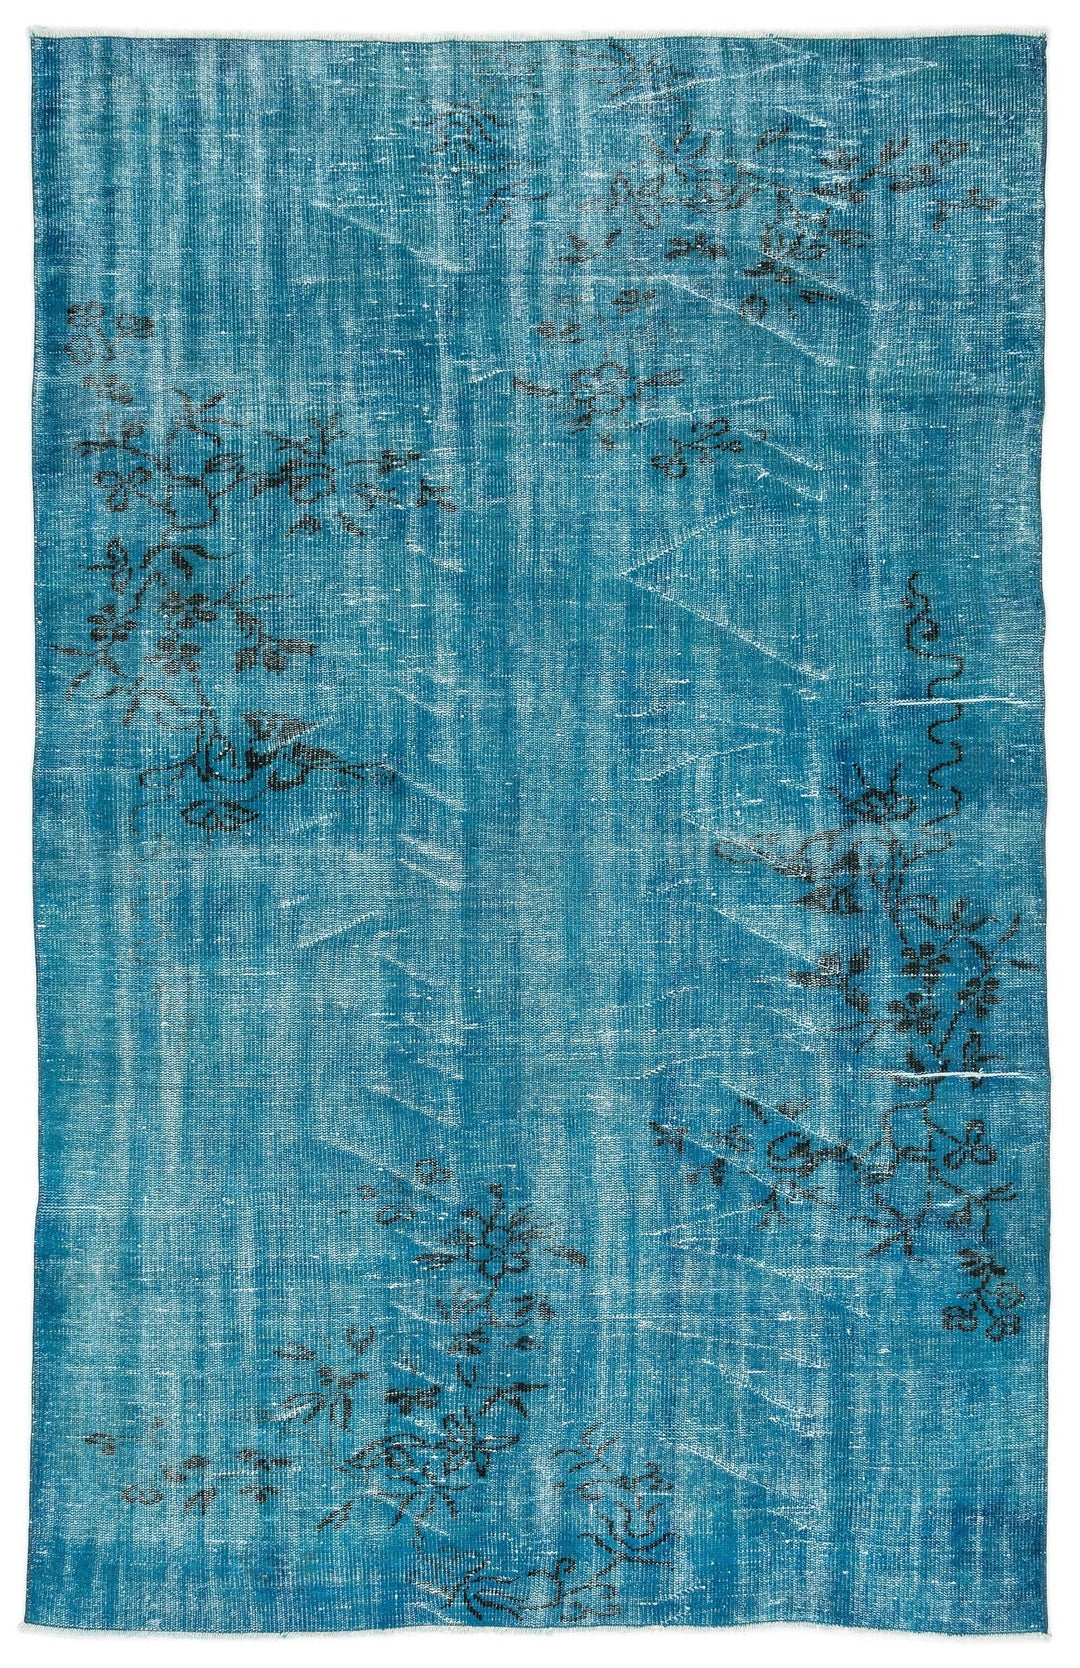 Athens Turquoise Tumbled Wool Hand Woven Rug 172 x 270